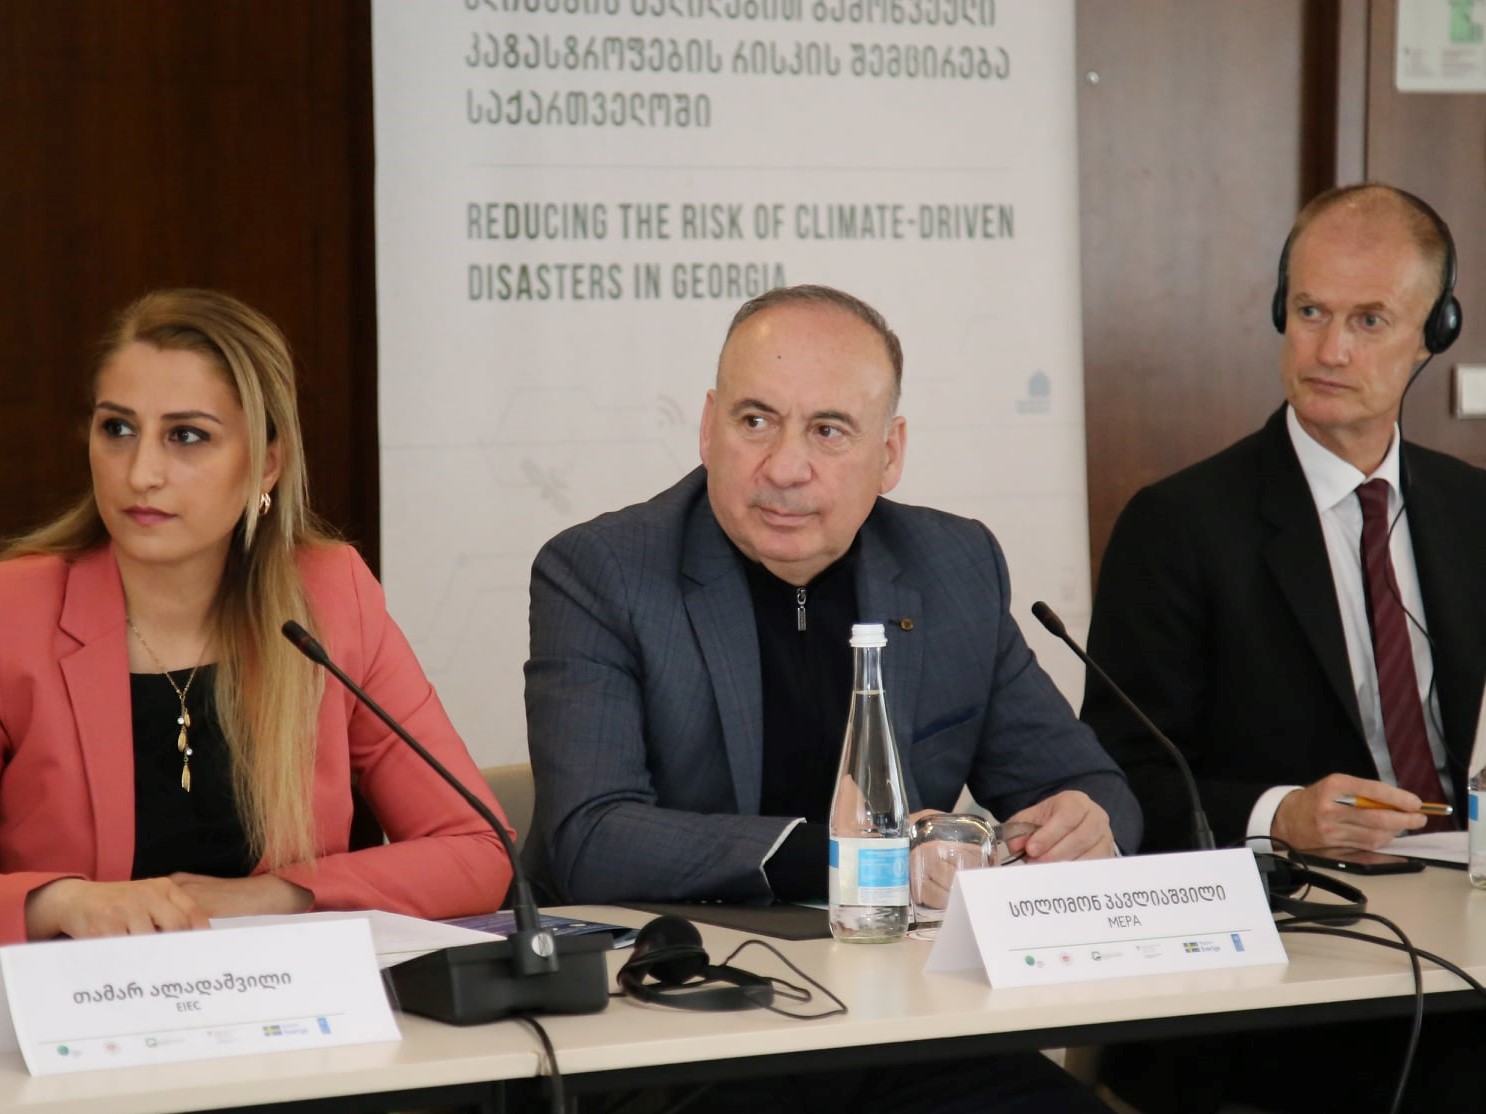 The meeting was held regarding ‘’reducing the risks of climate-driven disasters in Georgia 